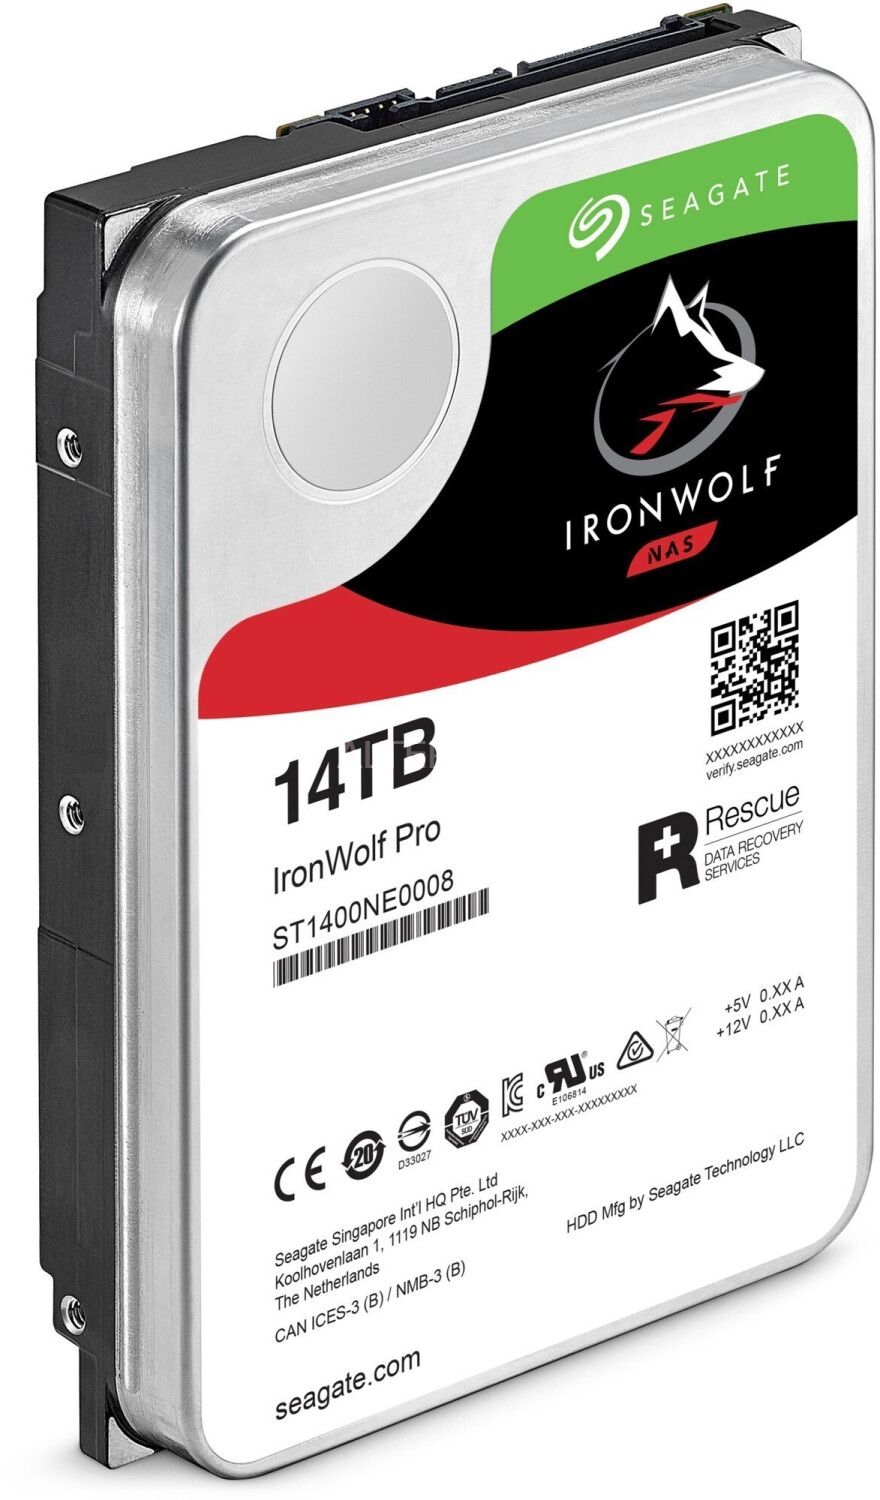 Seagate IronWolf ST12000VN0007 - Disque Dur - 12 TO - interne - 3.5 - avec  Seagate Rescue Data Recovery